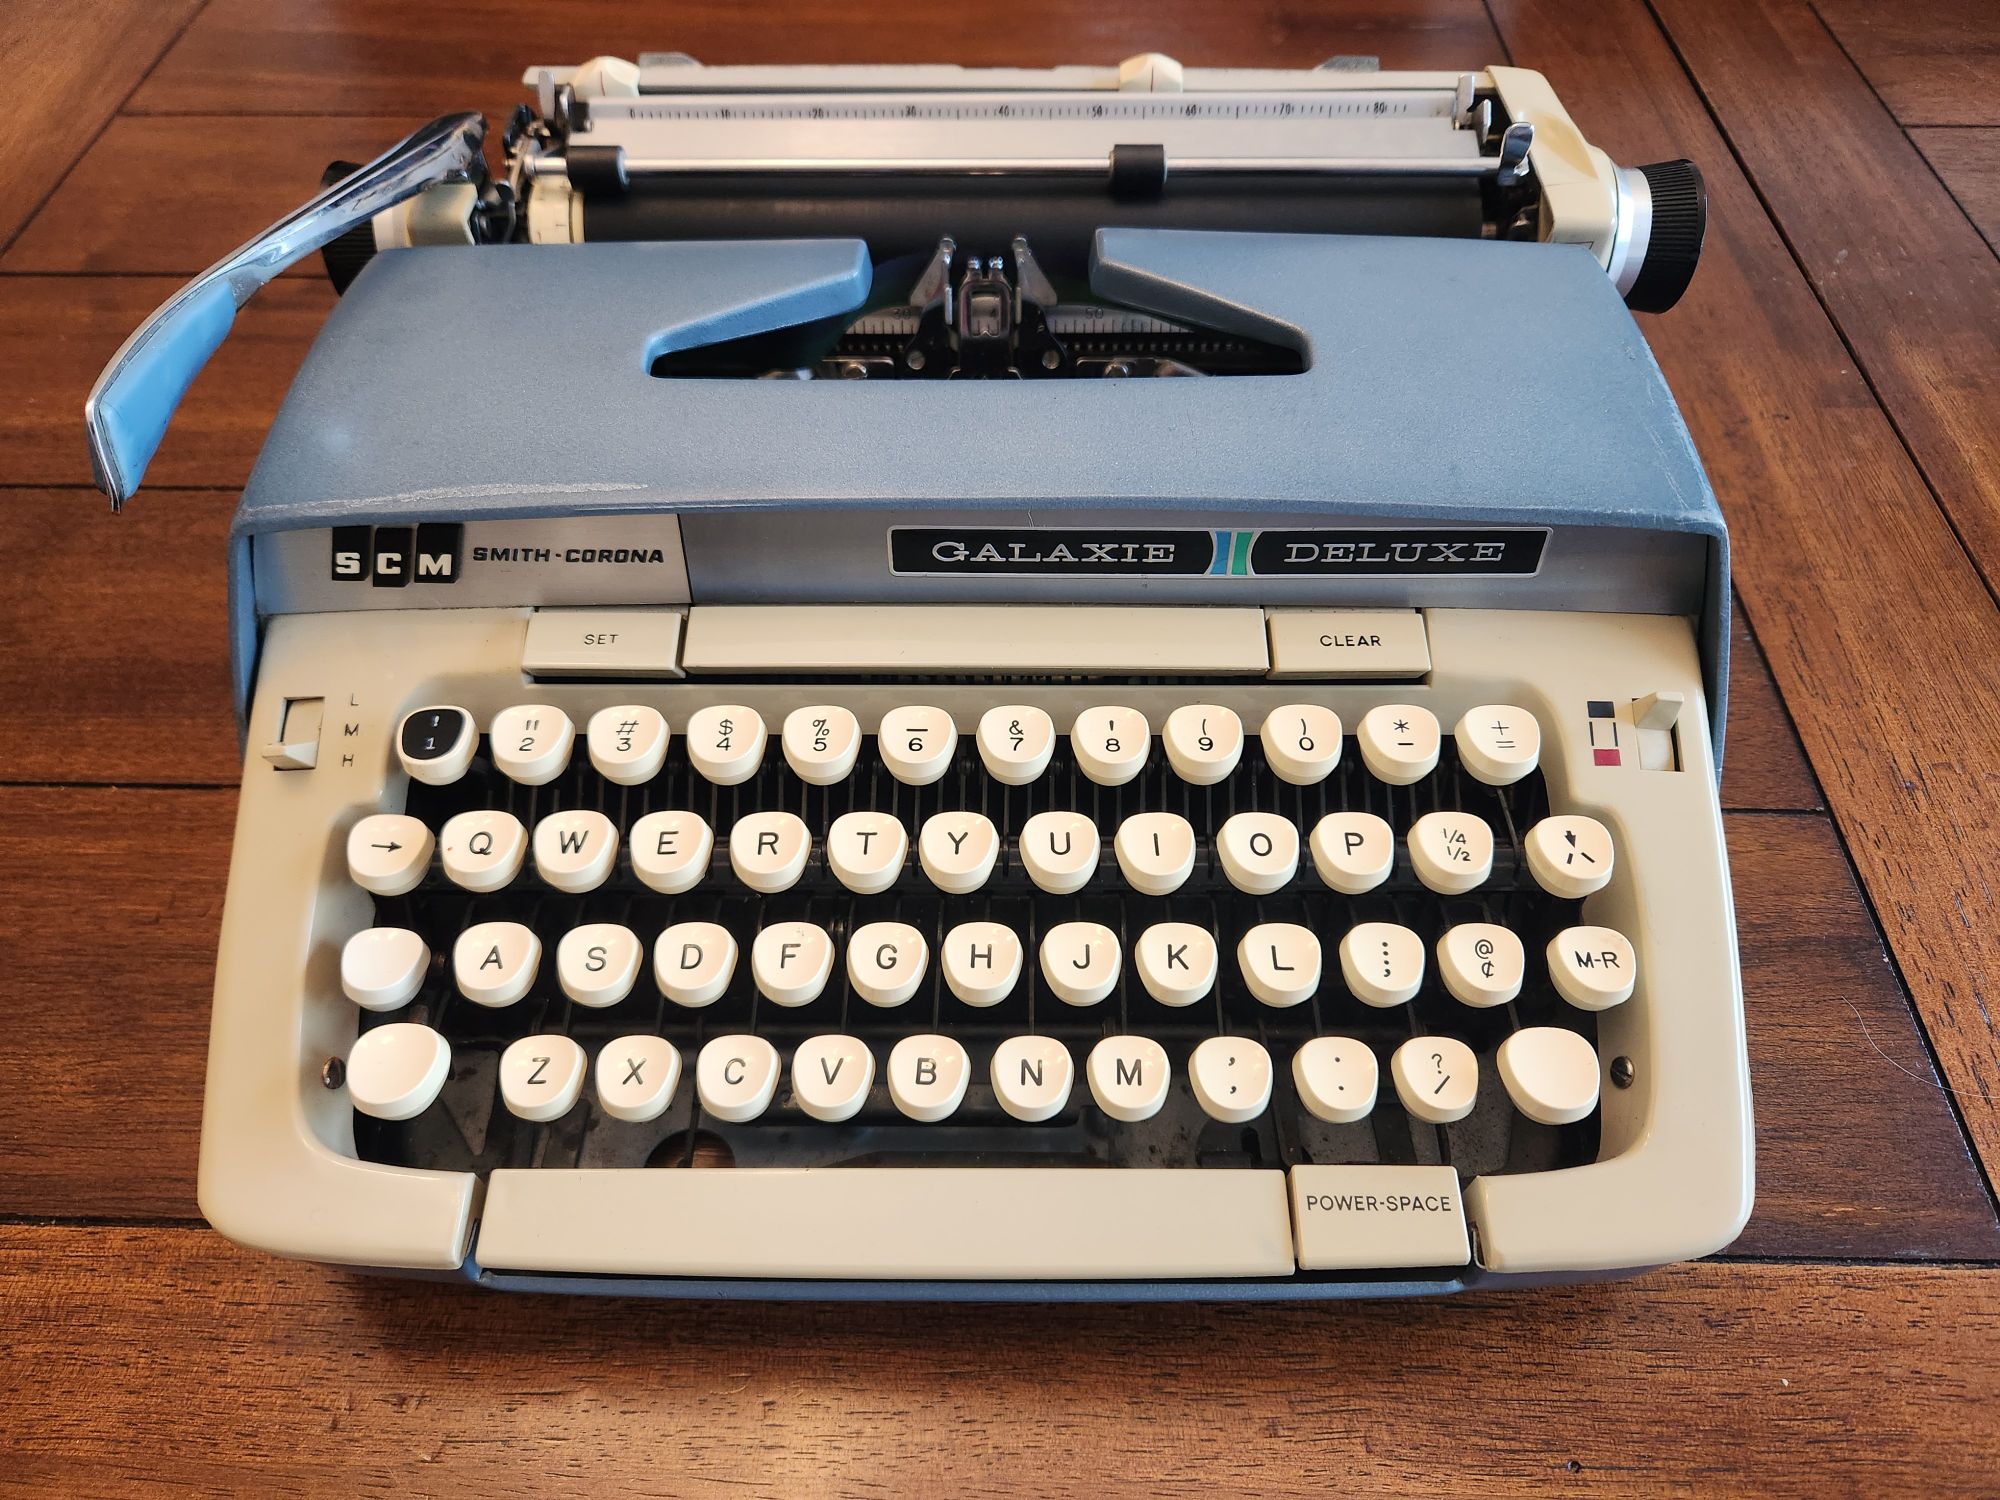 A blue late 60s/early 70s mod style Smith-Corona typewriter